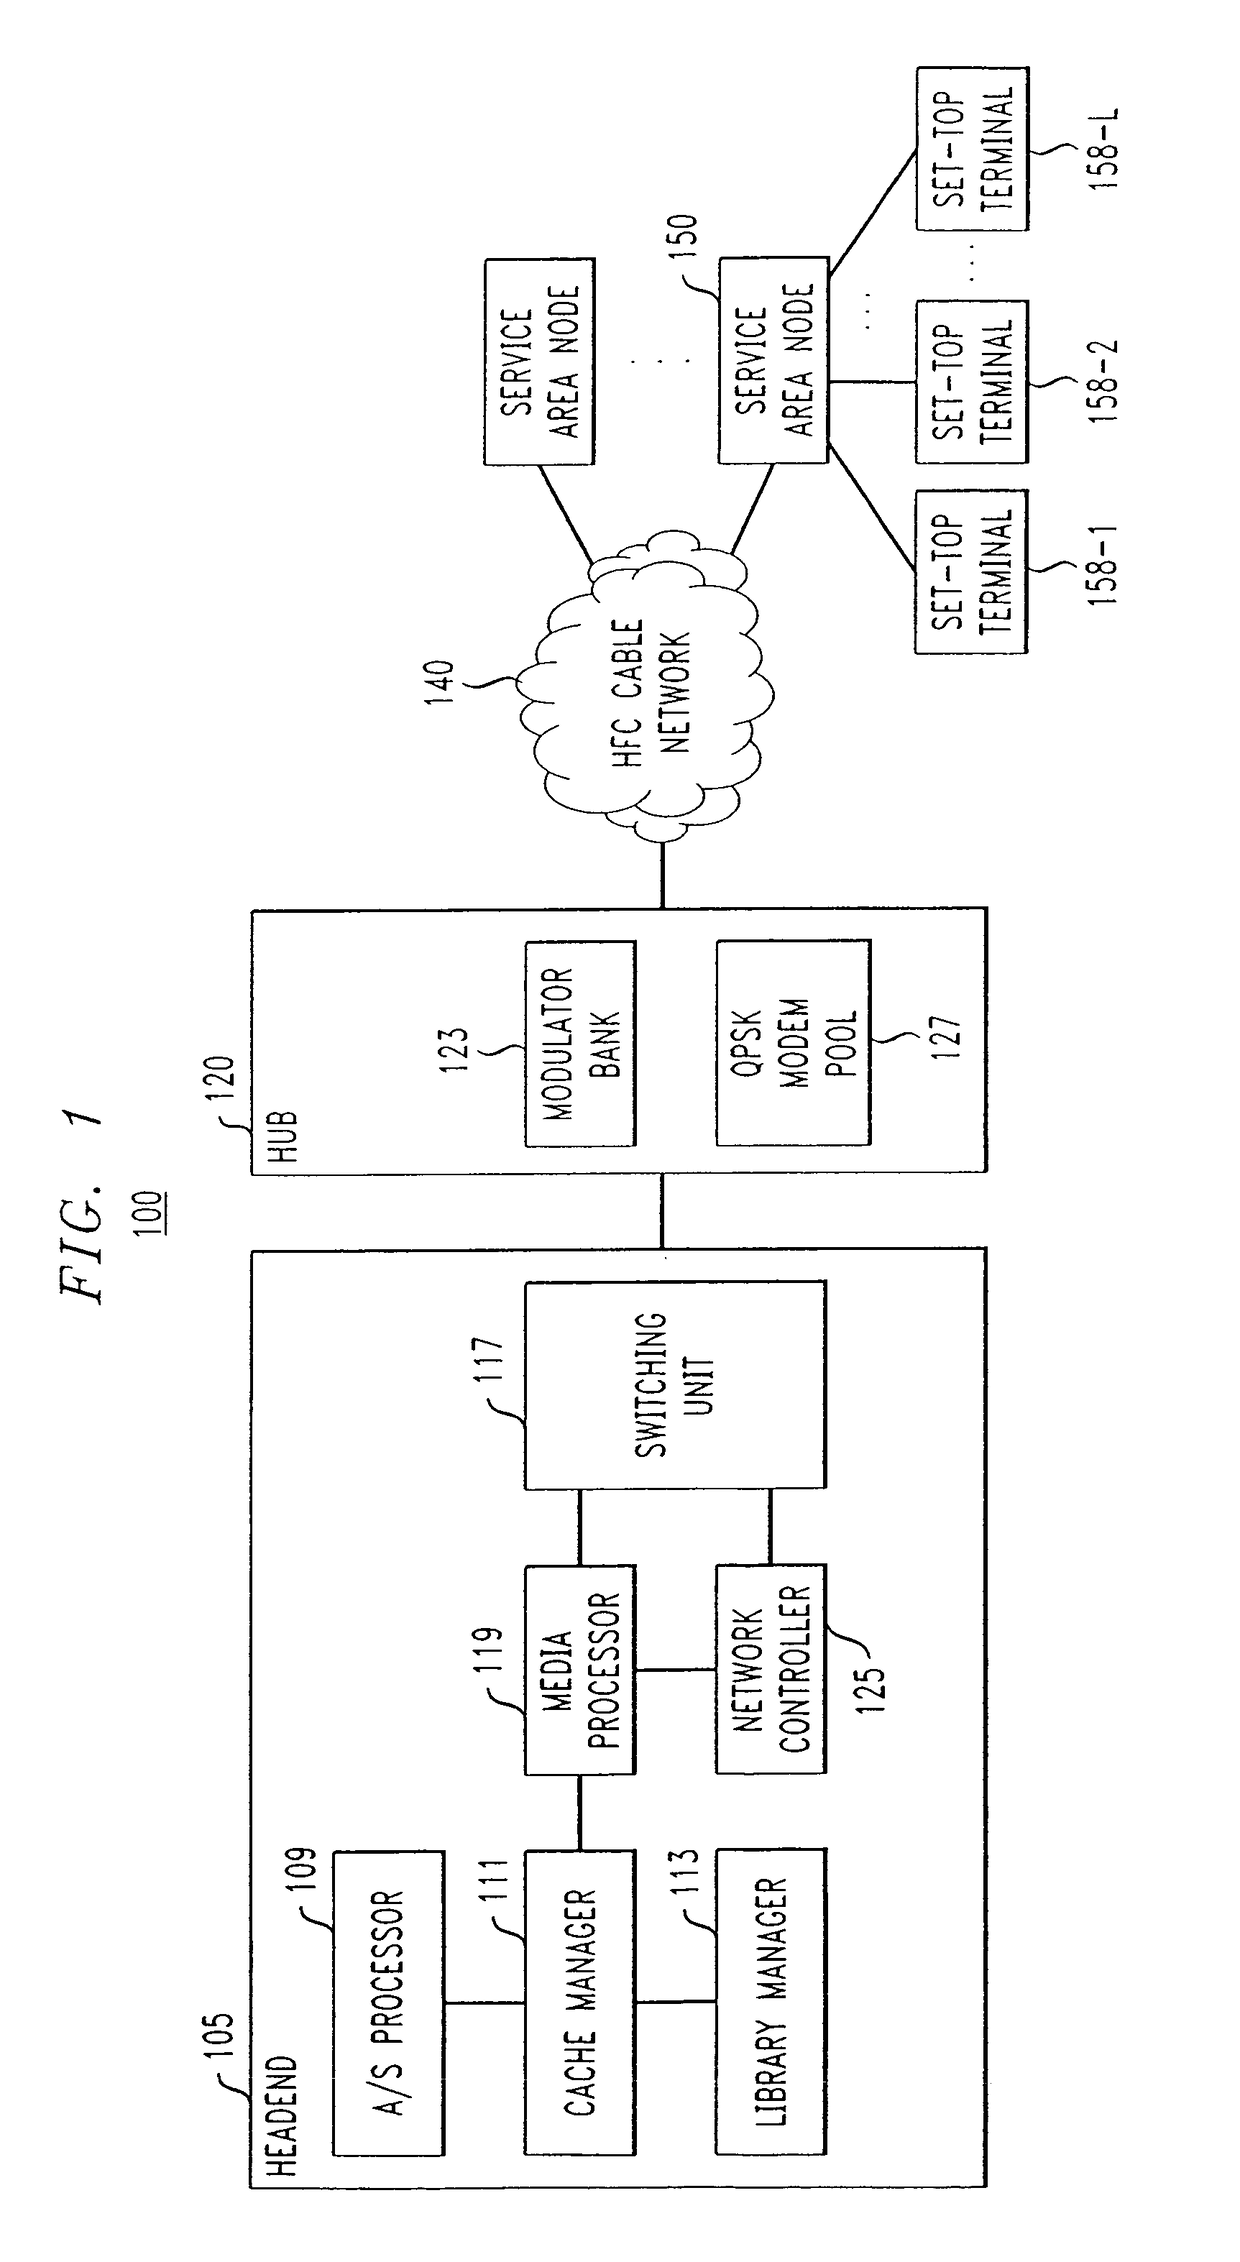 Network based digital information and entertainment storage and delivery system